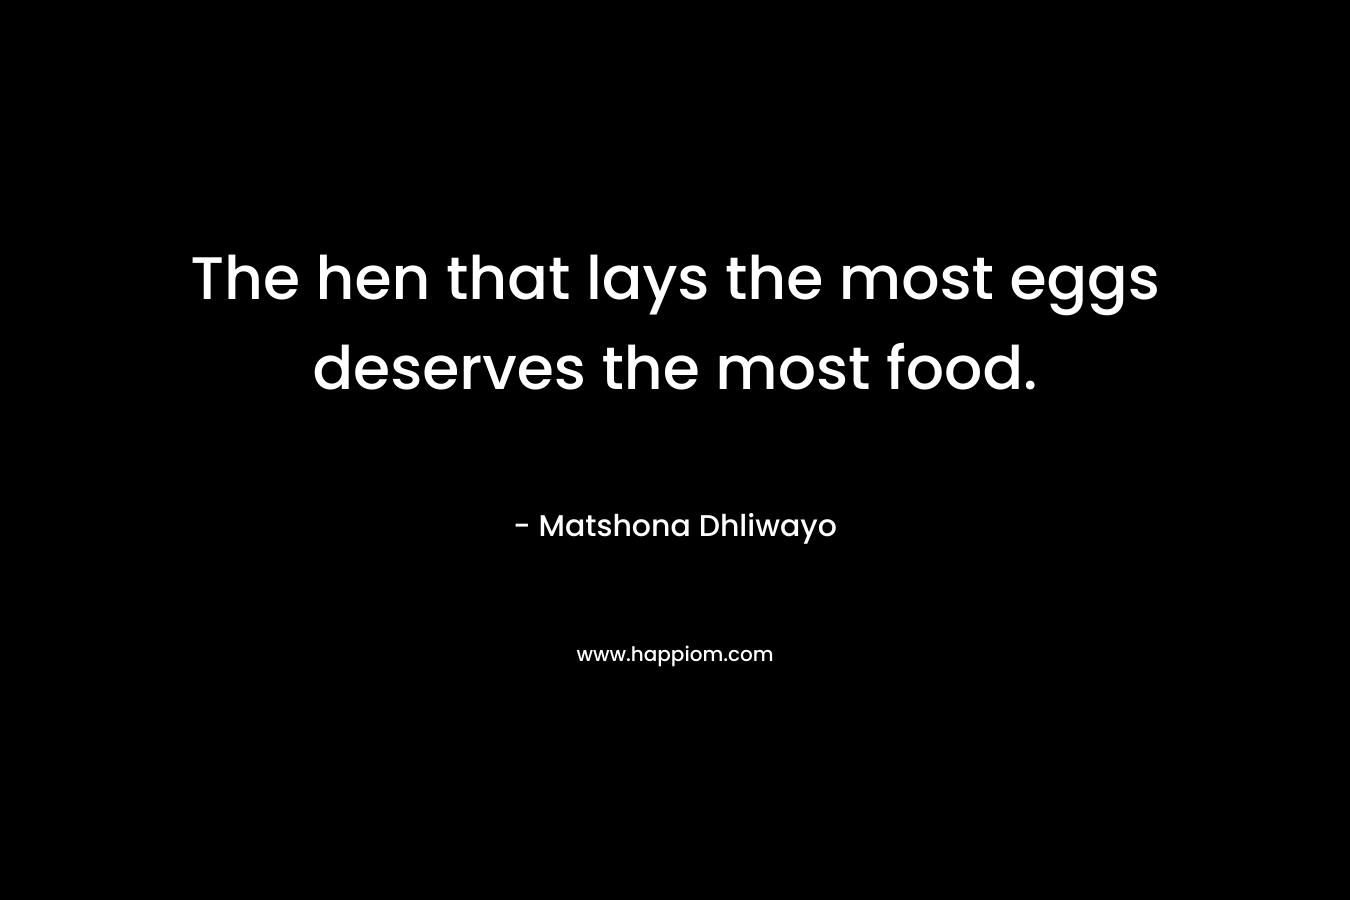 The hen that lays the most eggs deserves the most food. – Matshona Dhliwayo